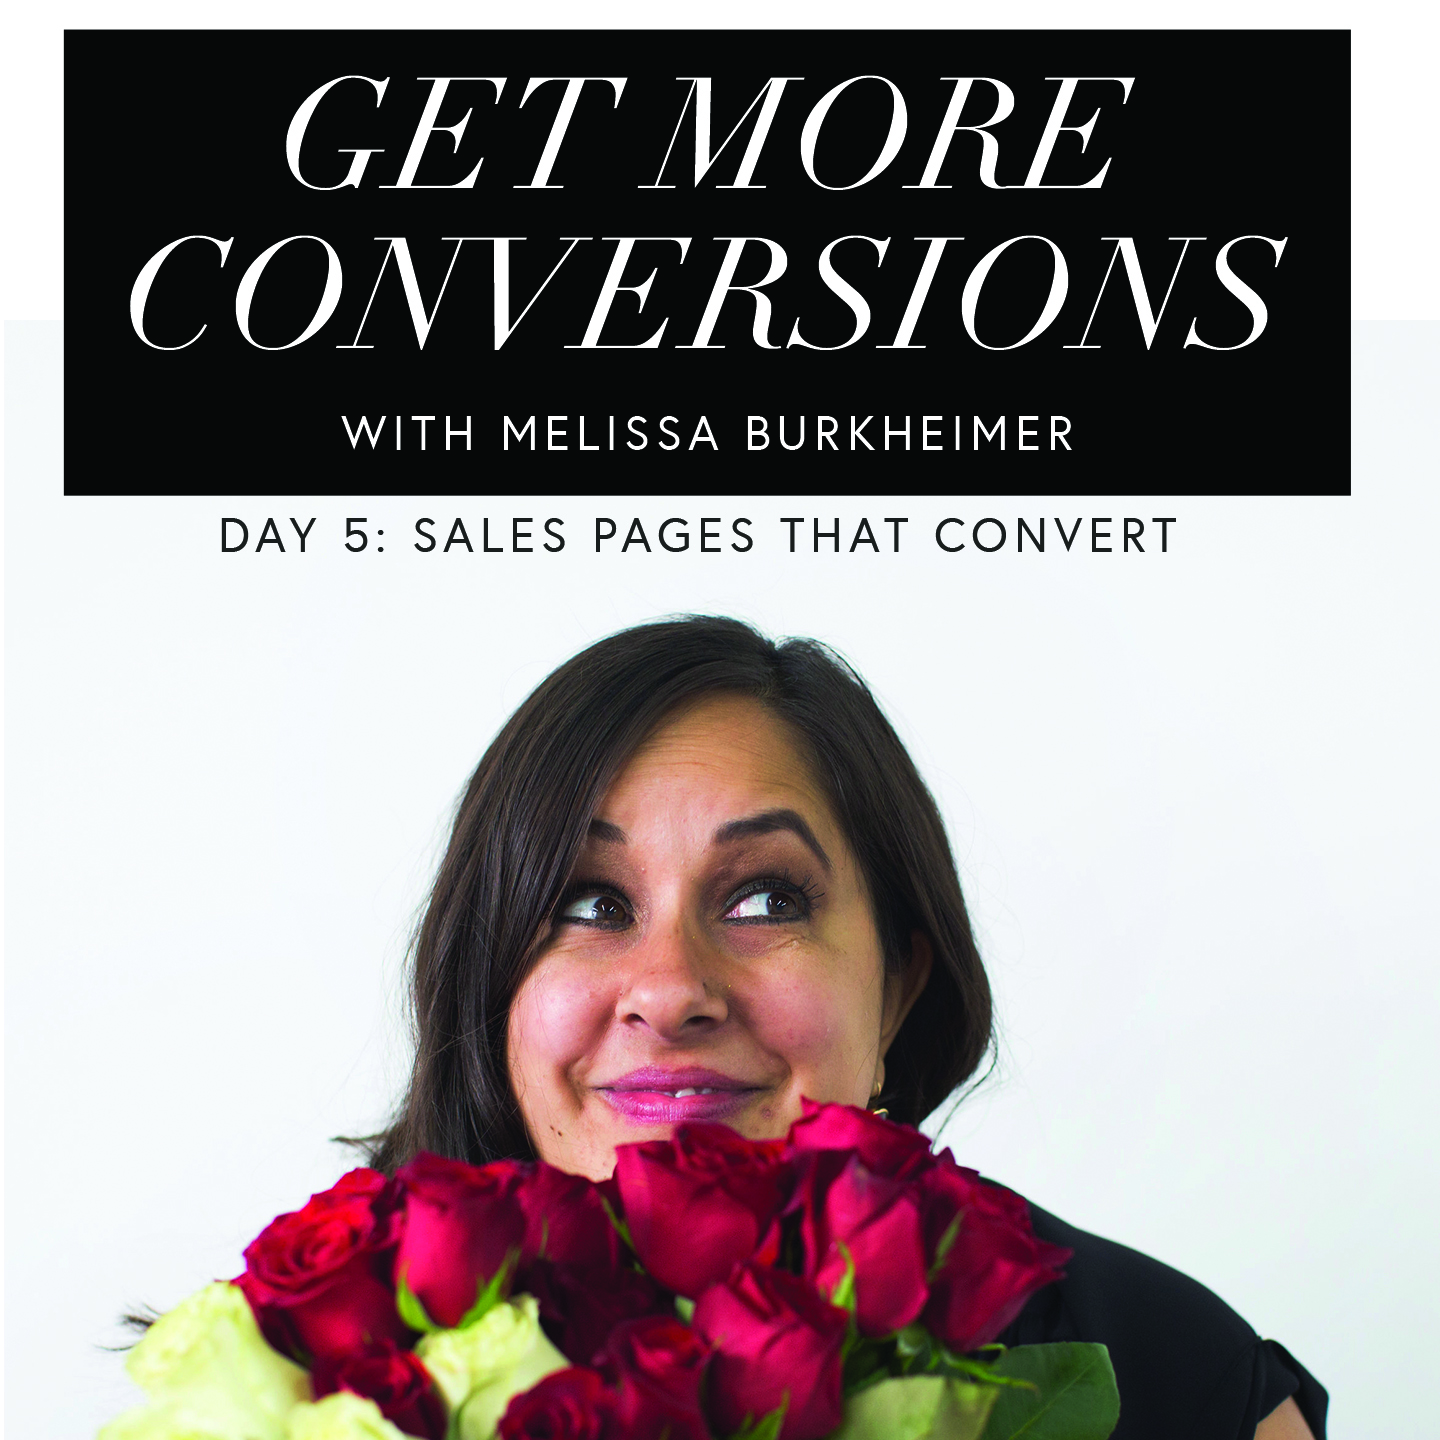 Check out episode 72 of The Design Business Show to learn to create sales pages that convert.